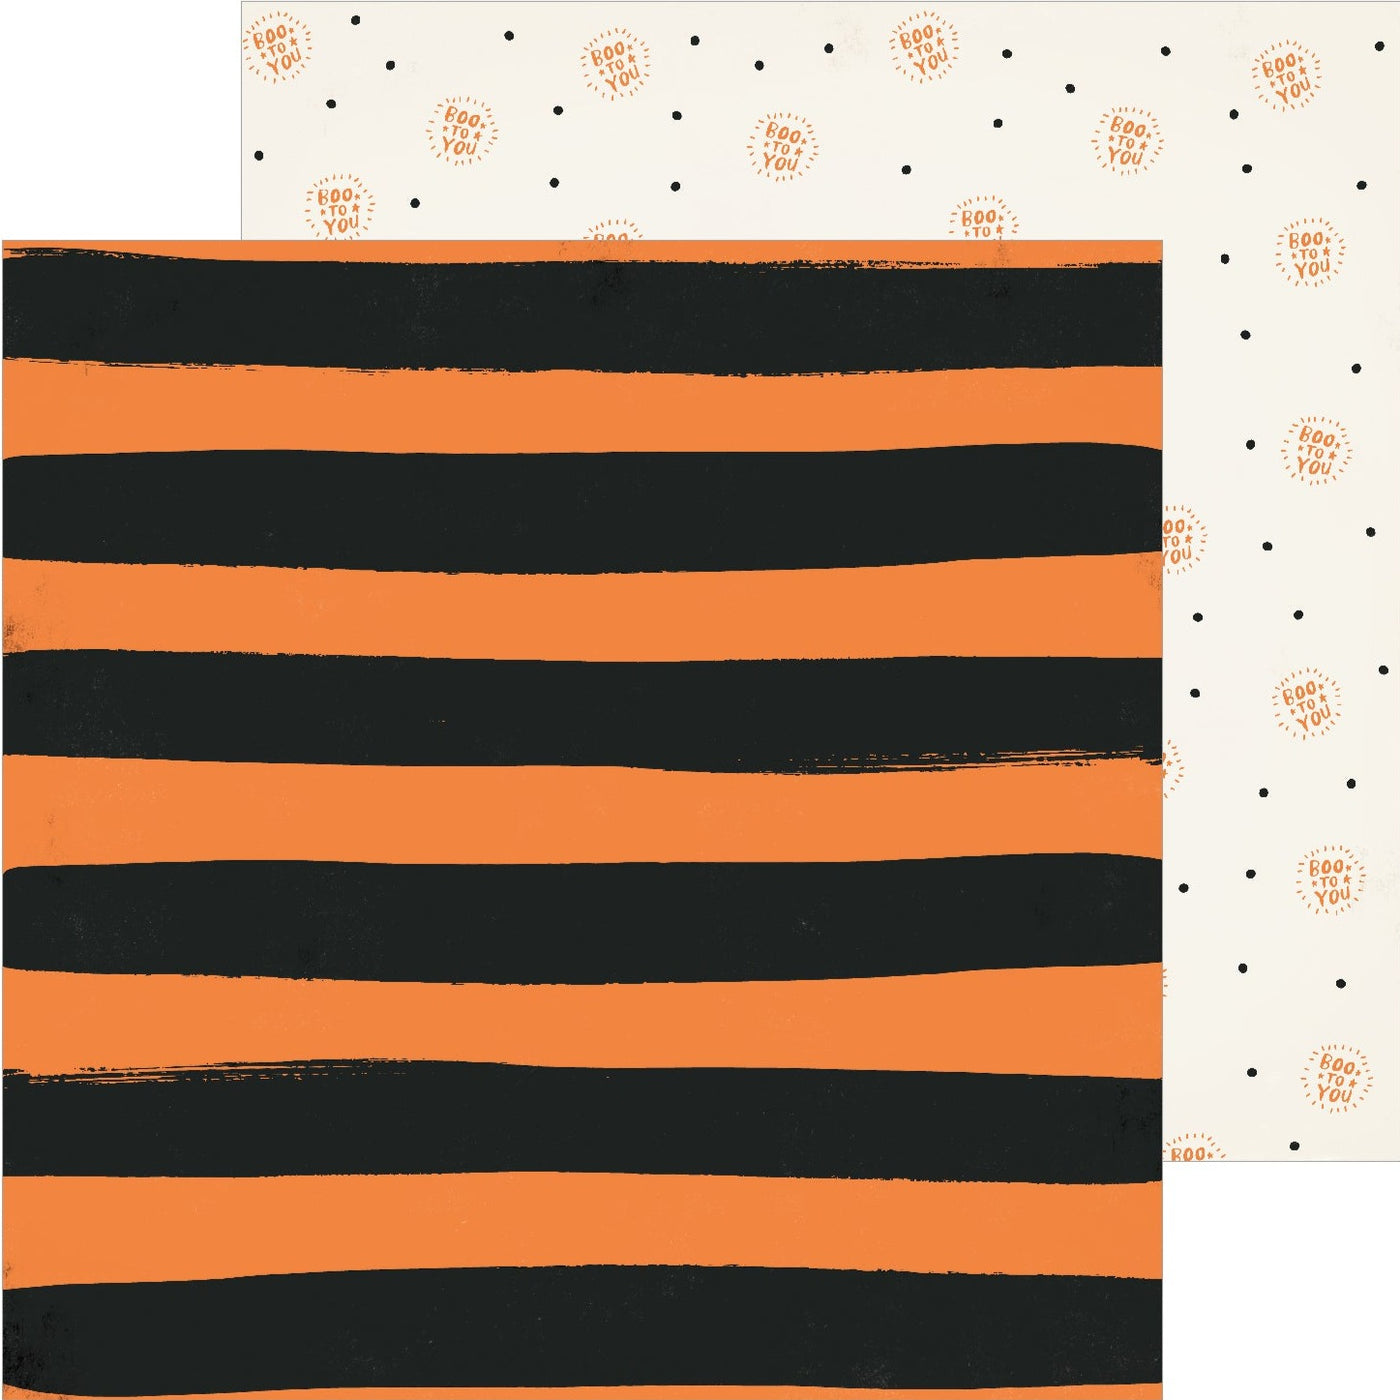 Multi-colored (Side A - large black stripes on an orange background, Side B - circles with the phrase - Boo To you, random black polka dots on cream background)